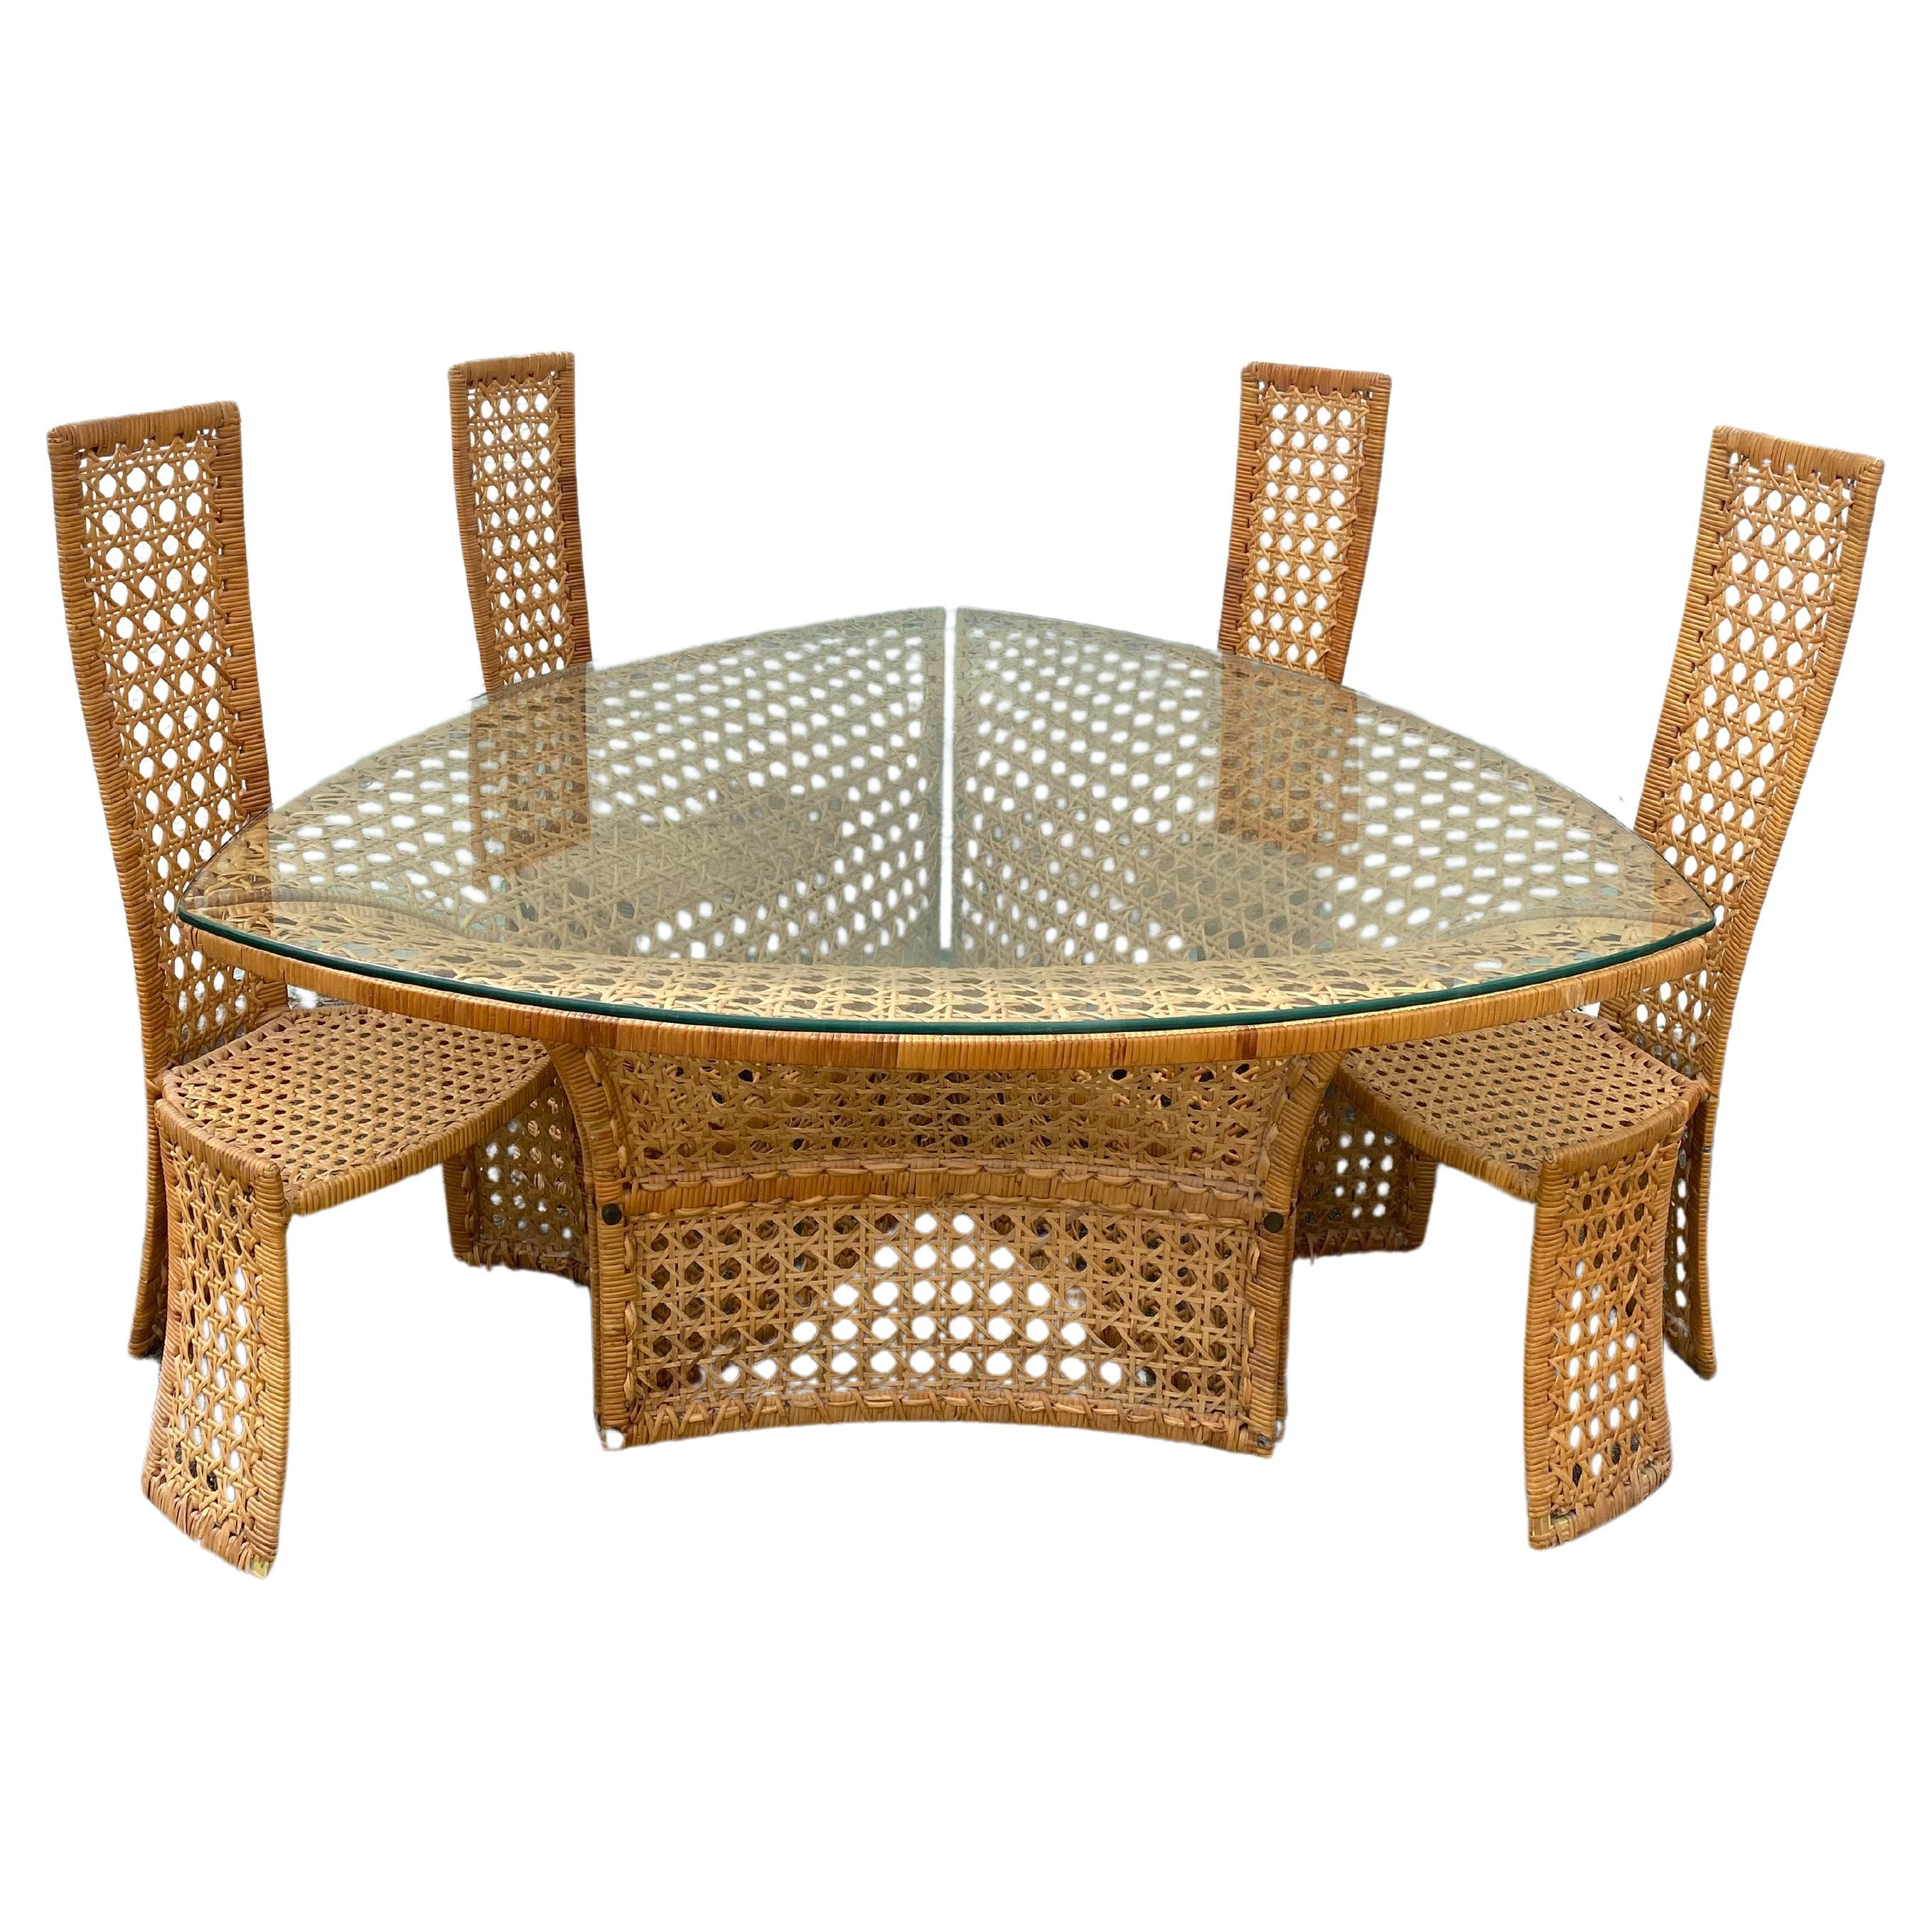 Danny Ho Fong Dining Room Tables